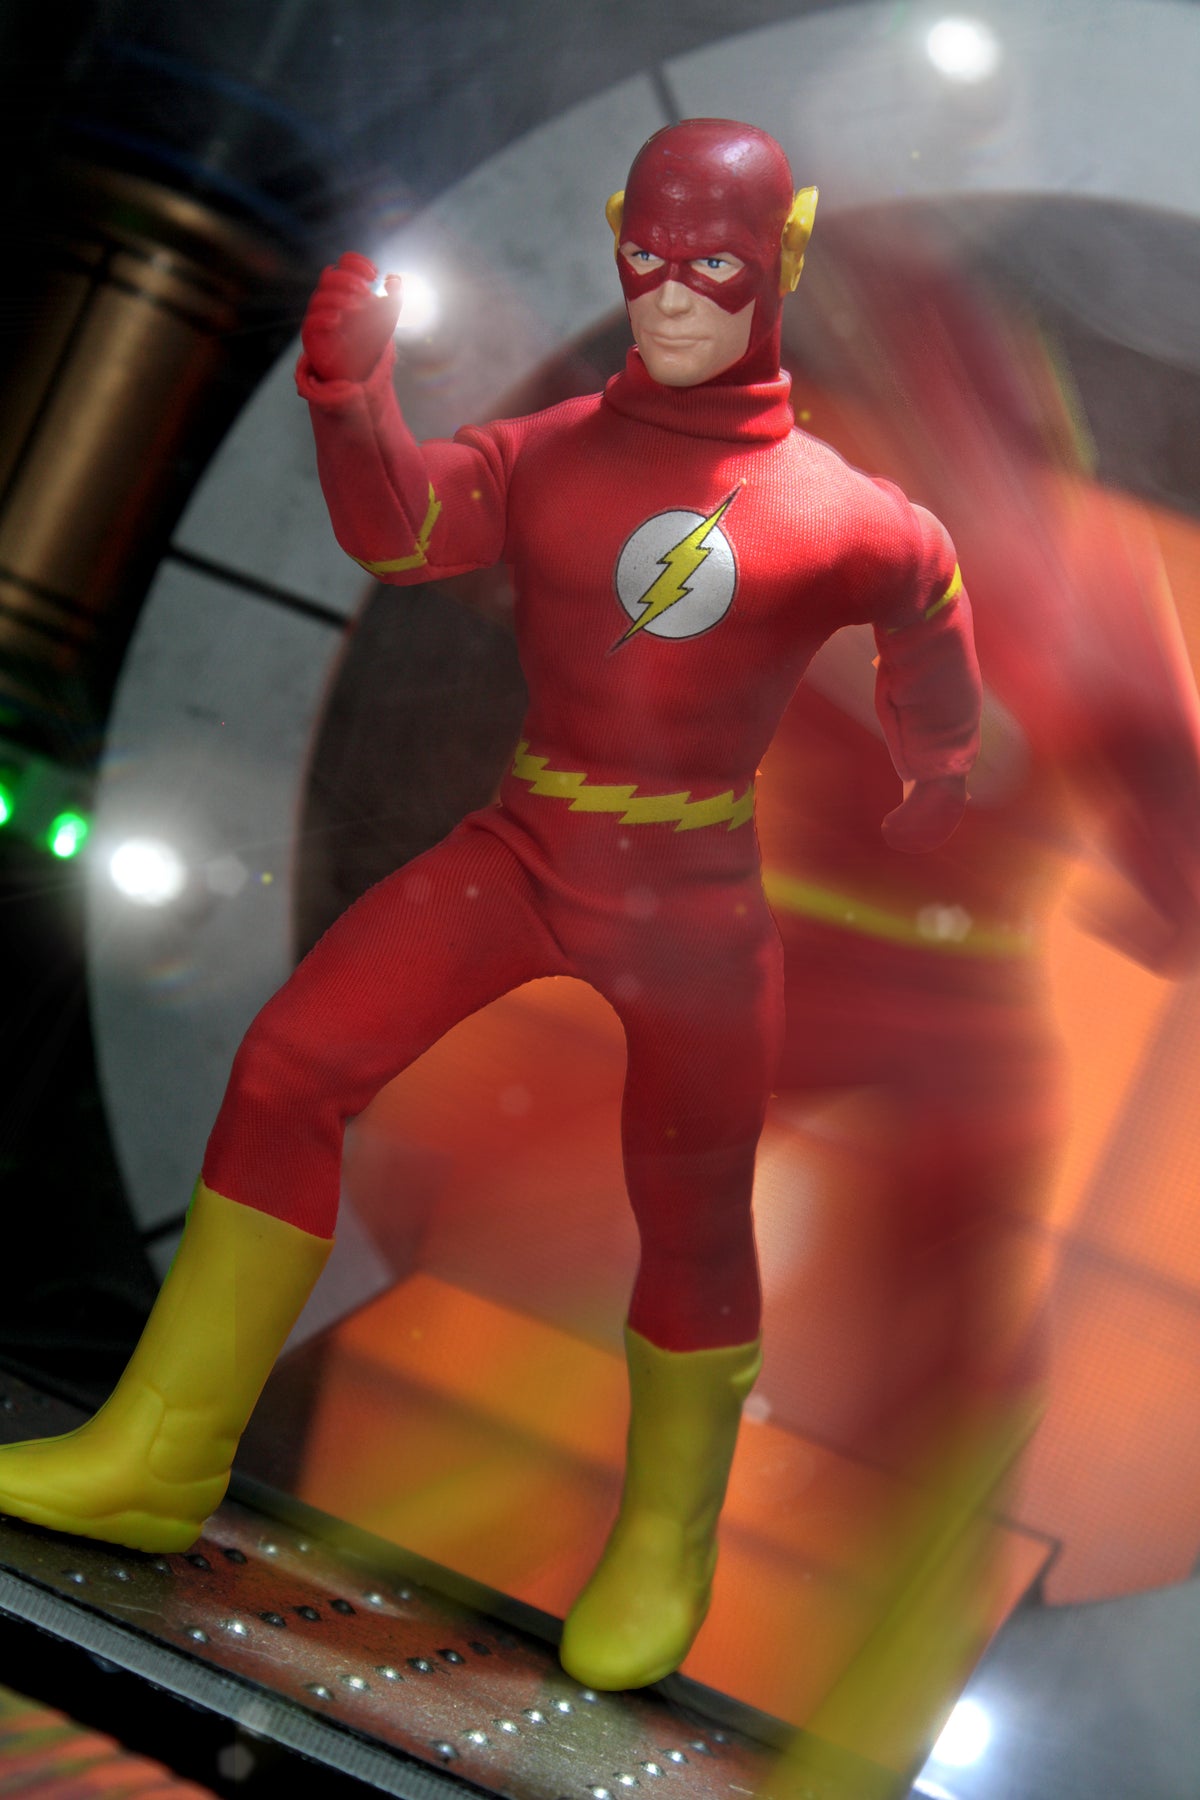 Mego Wave 16 - The Flash 50th Anniversary World's Greatest Superheroes (Classic Box) 8" Action Figure